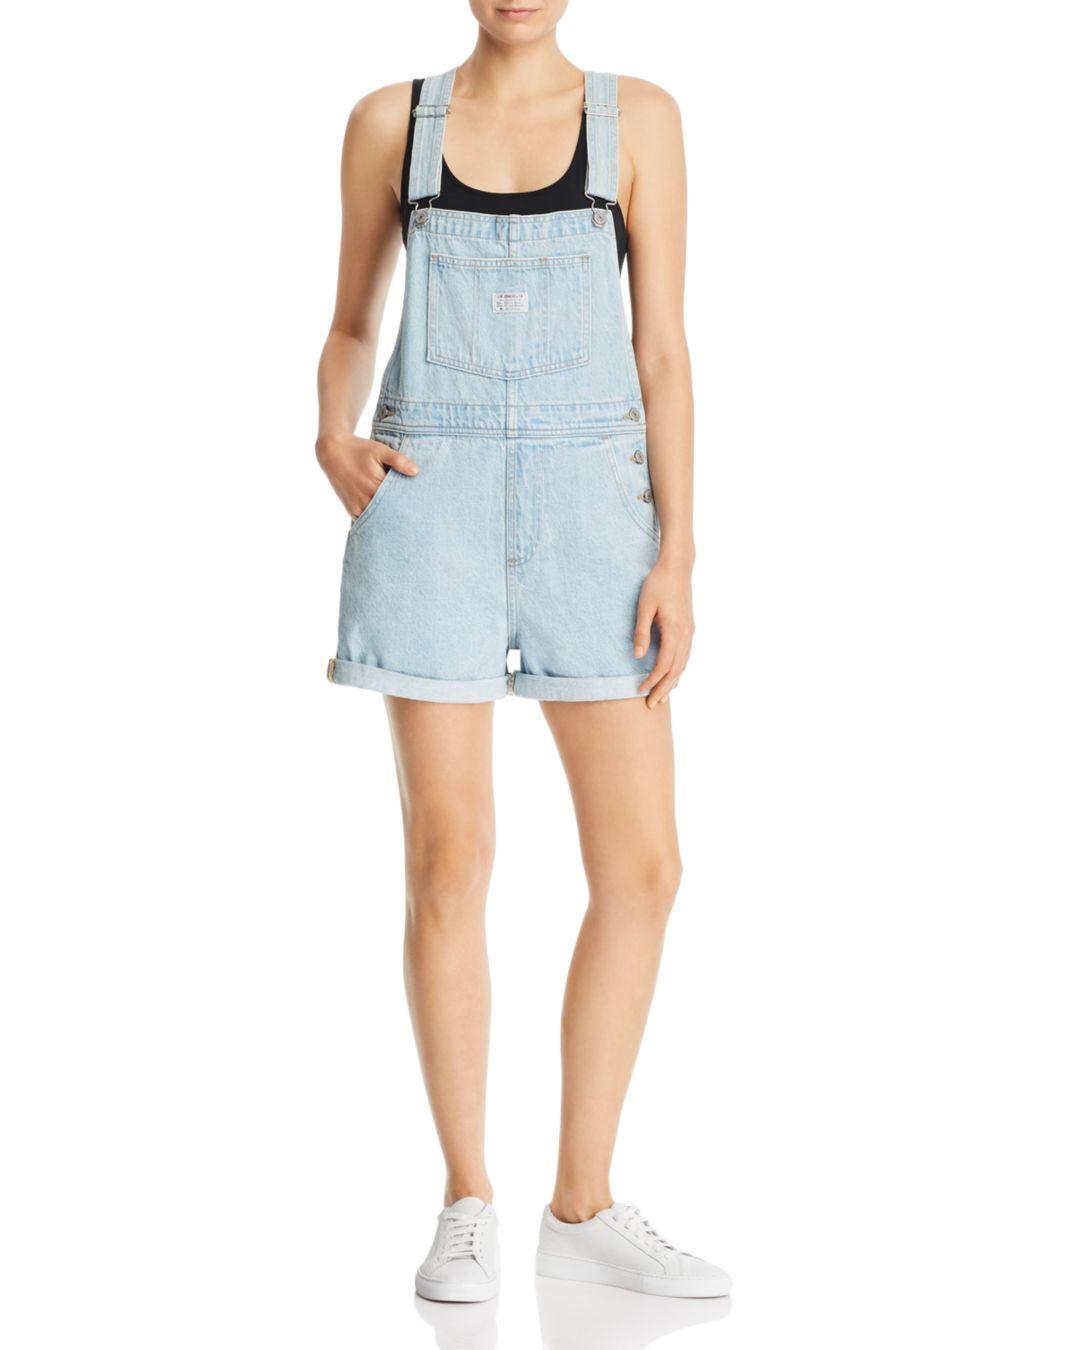 Levi's Vintage Denim Shortalls In Short And Sweet in Blue - Save 70% - Lyst